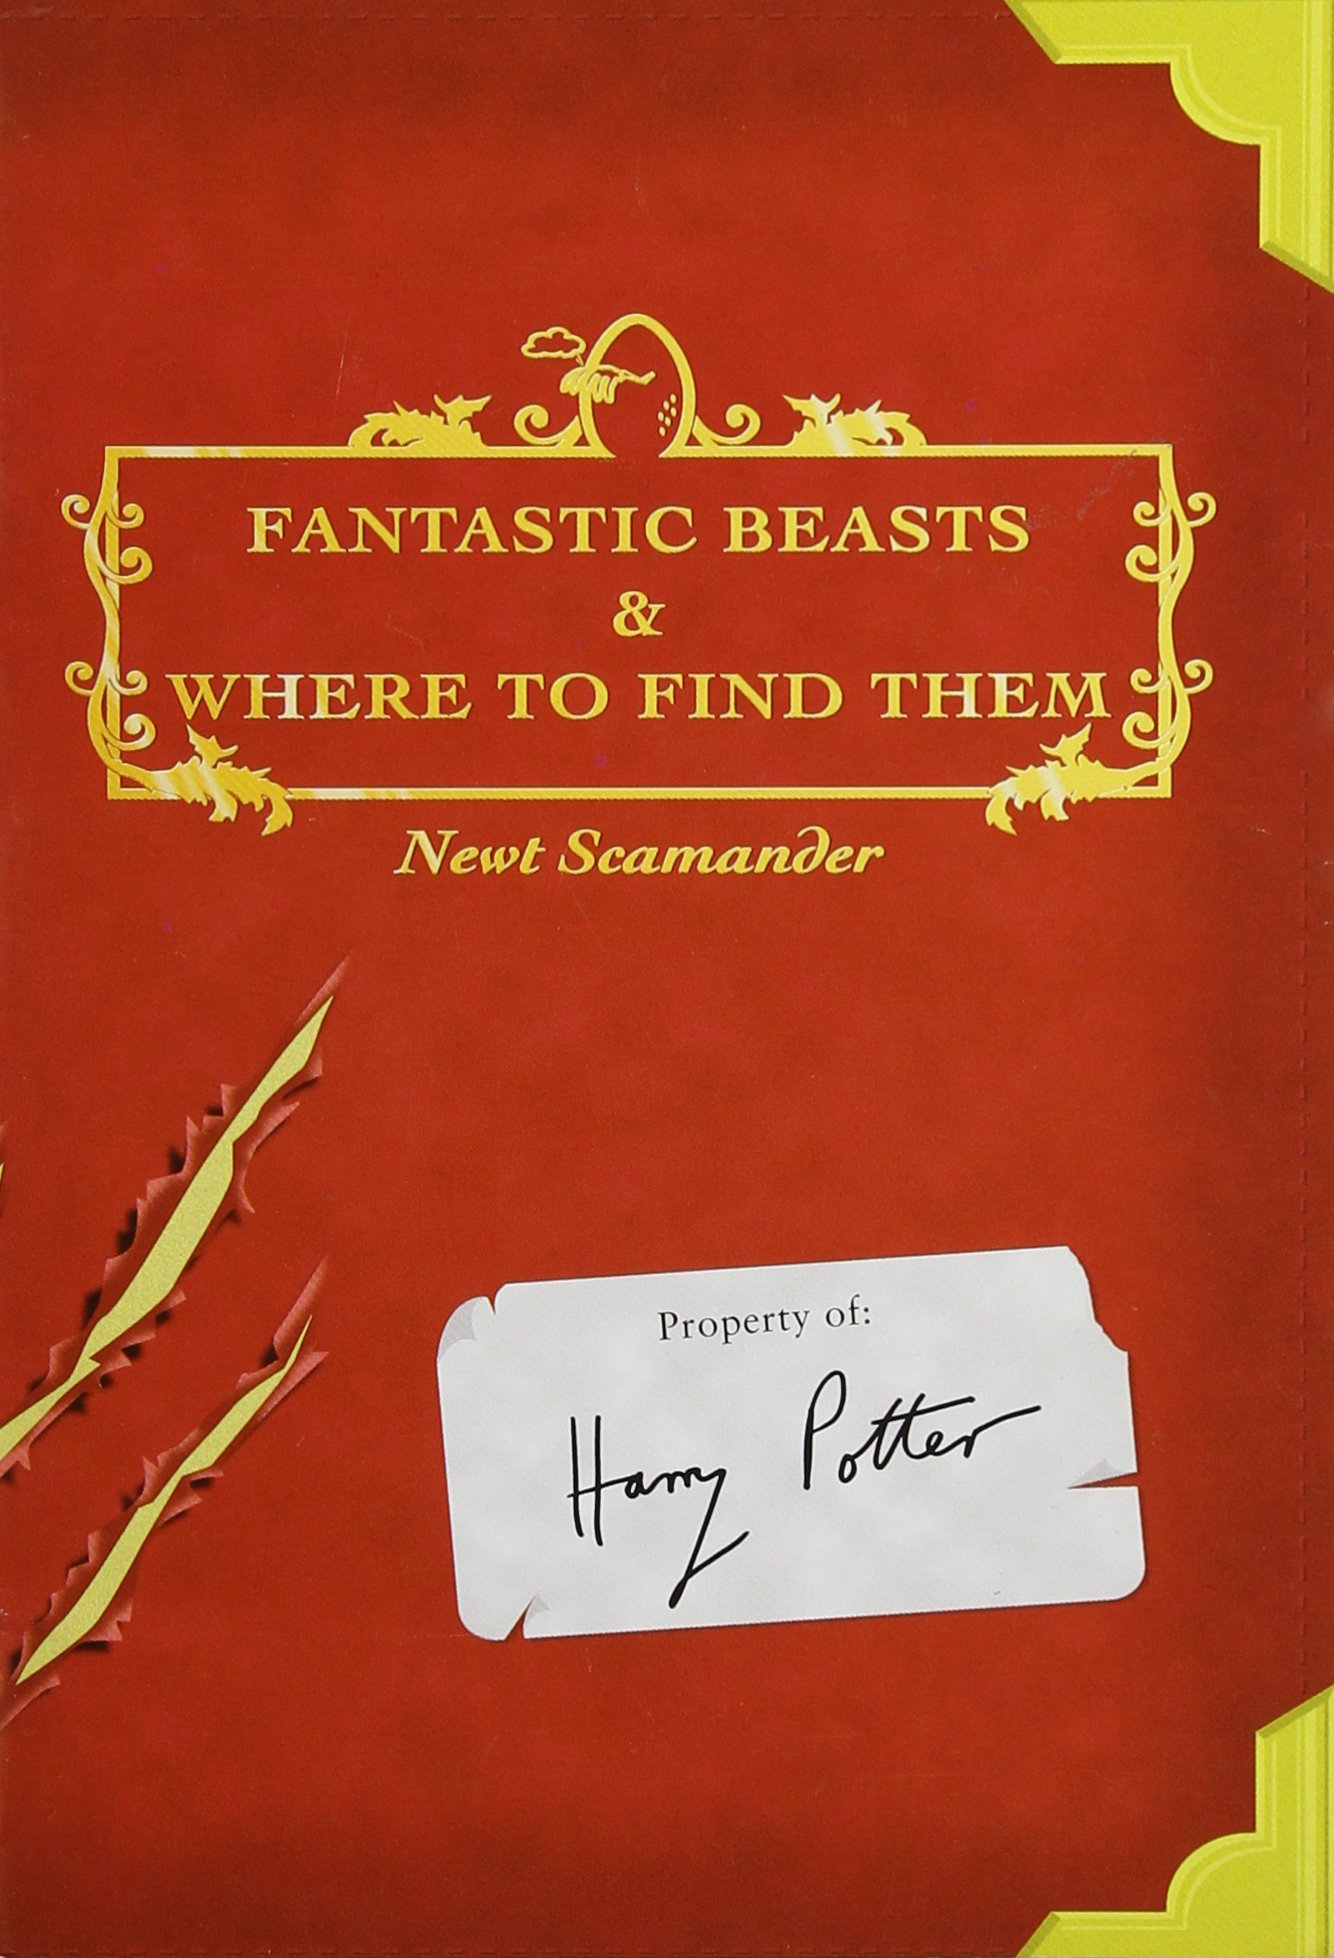 http://www.harry-potter.net.pl/images/articles/fz_ang.jpg